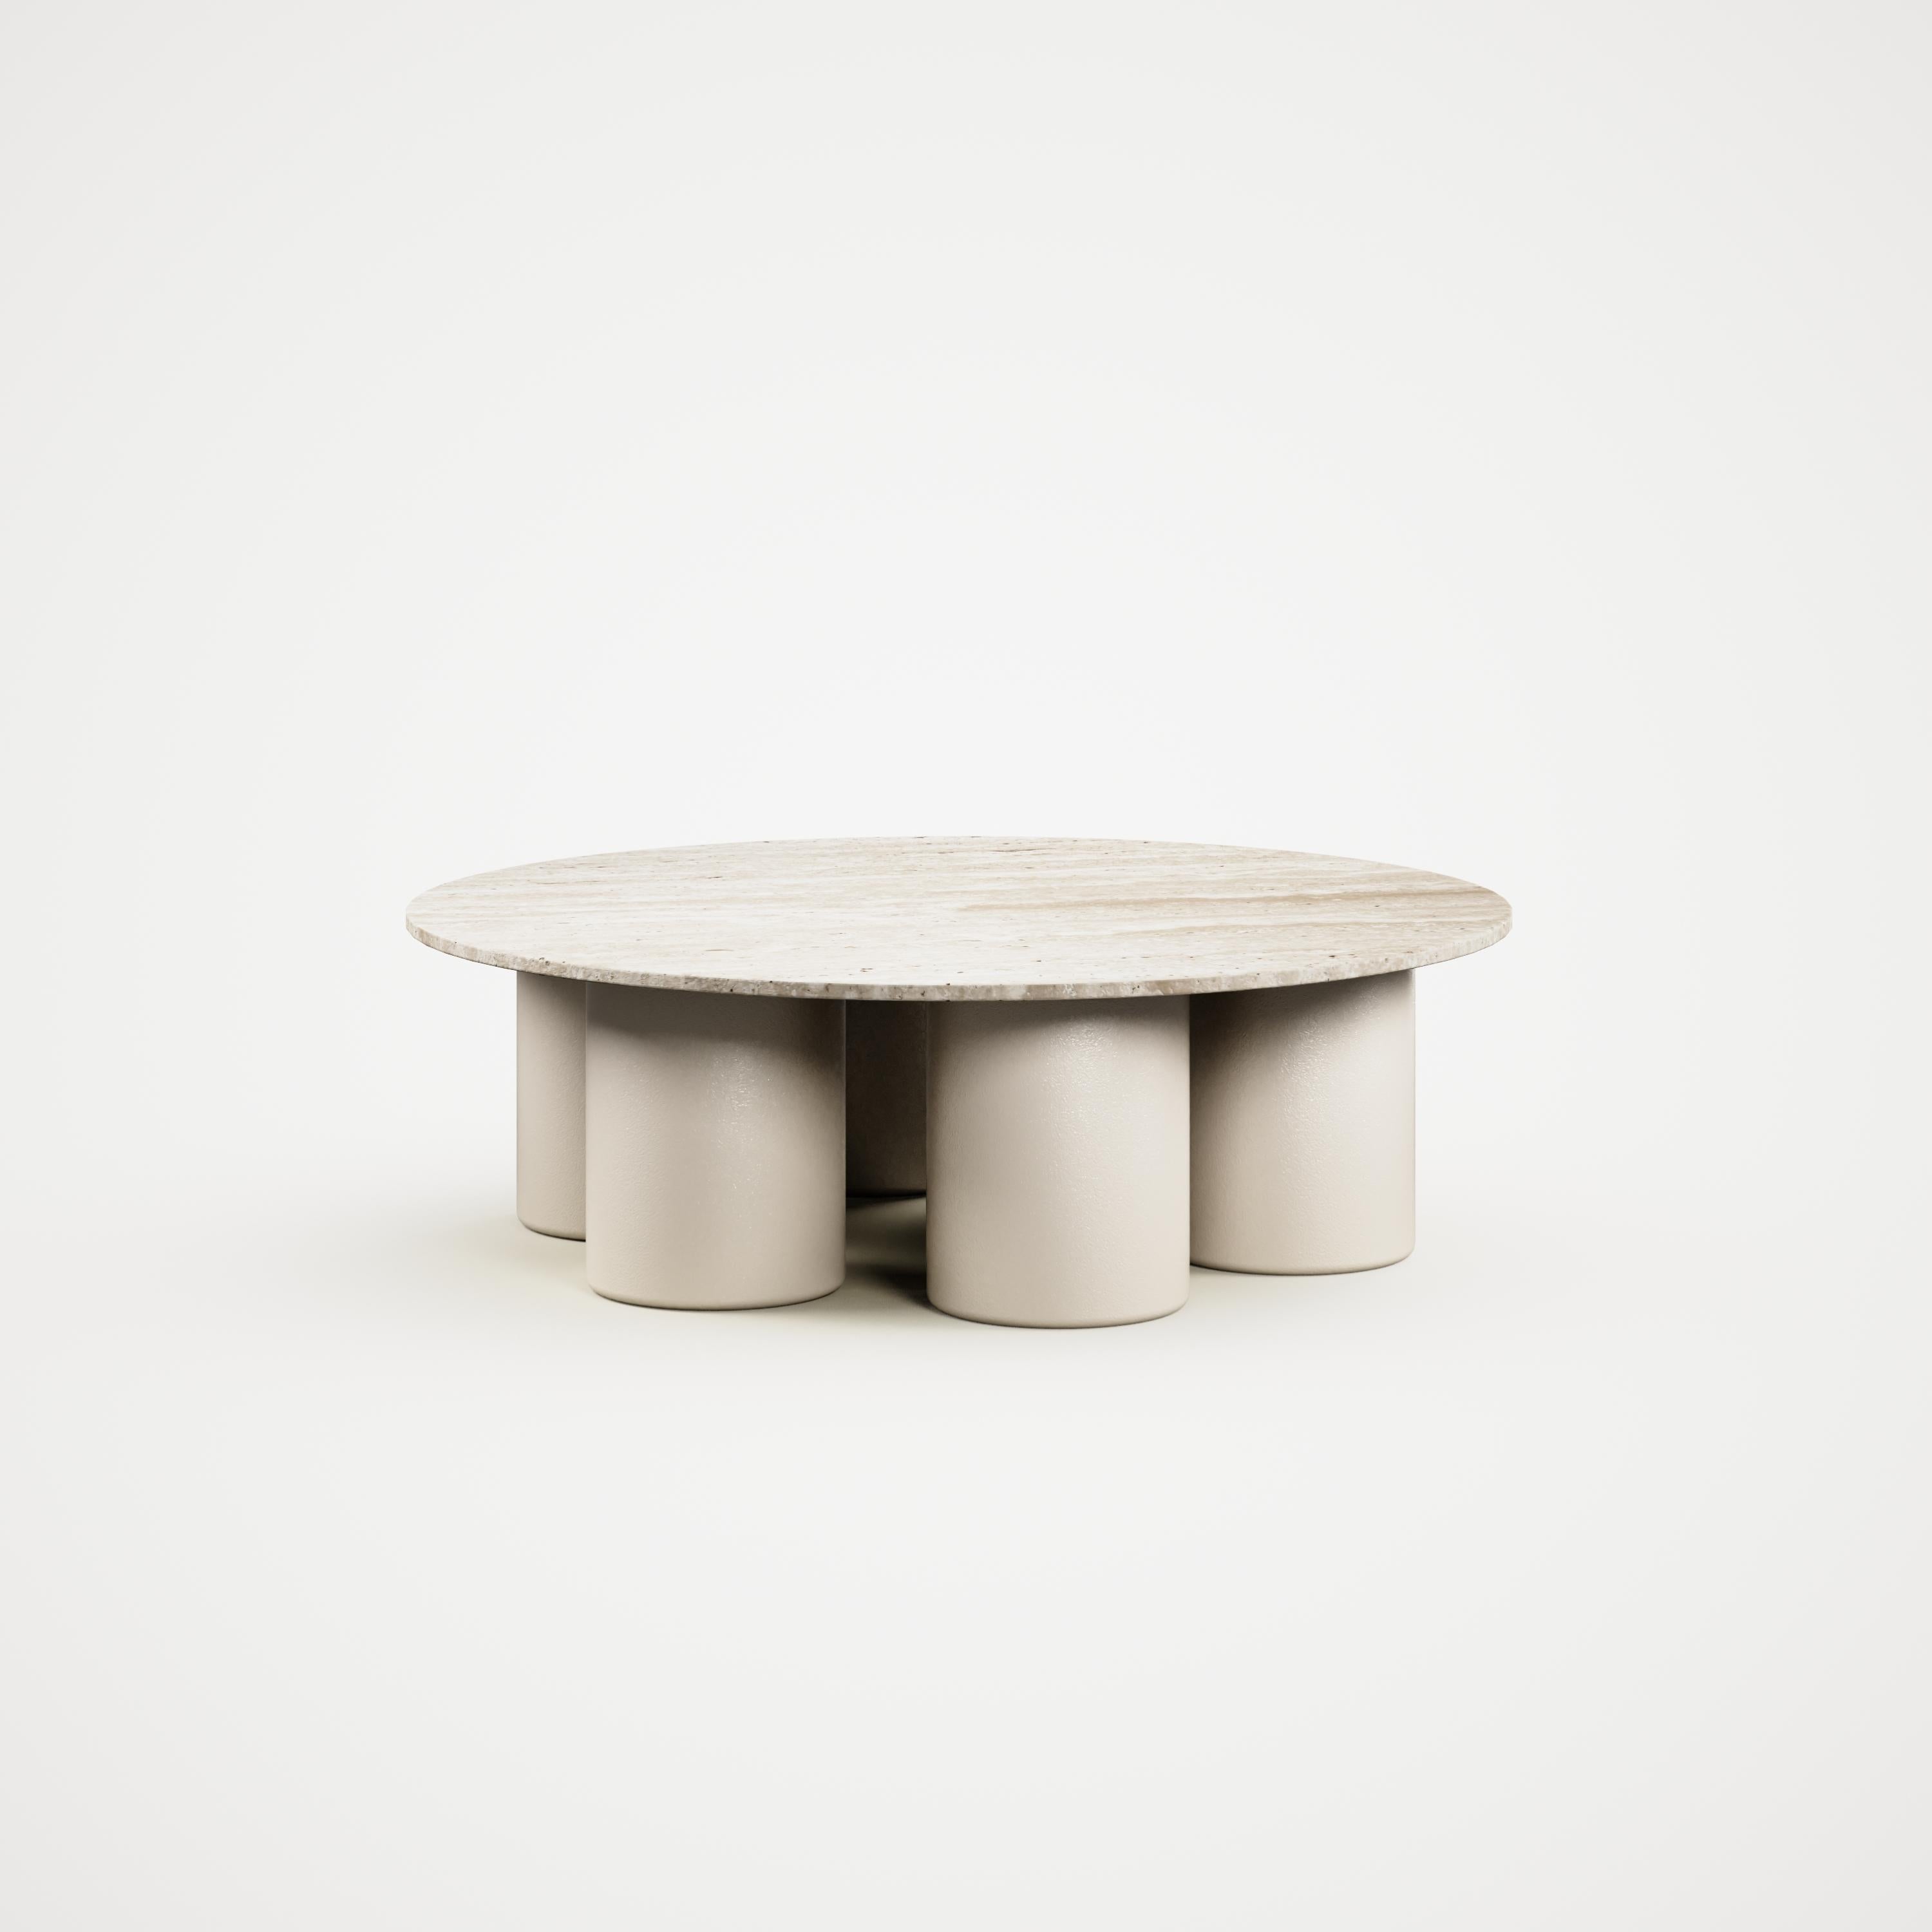 High end round Stainless steel coffee table with travertine top designed by Vincent Mazenauer. The table can be lacquered in all colors (white, black, grey, gold, yellow, red, yellow, blue, etc). 
That table came from the Element coffee table